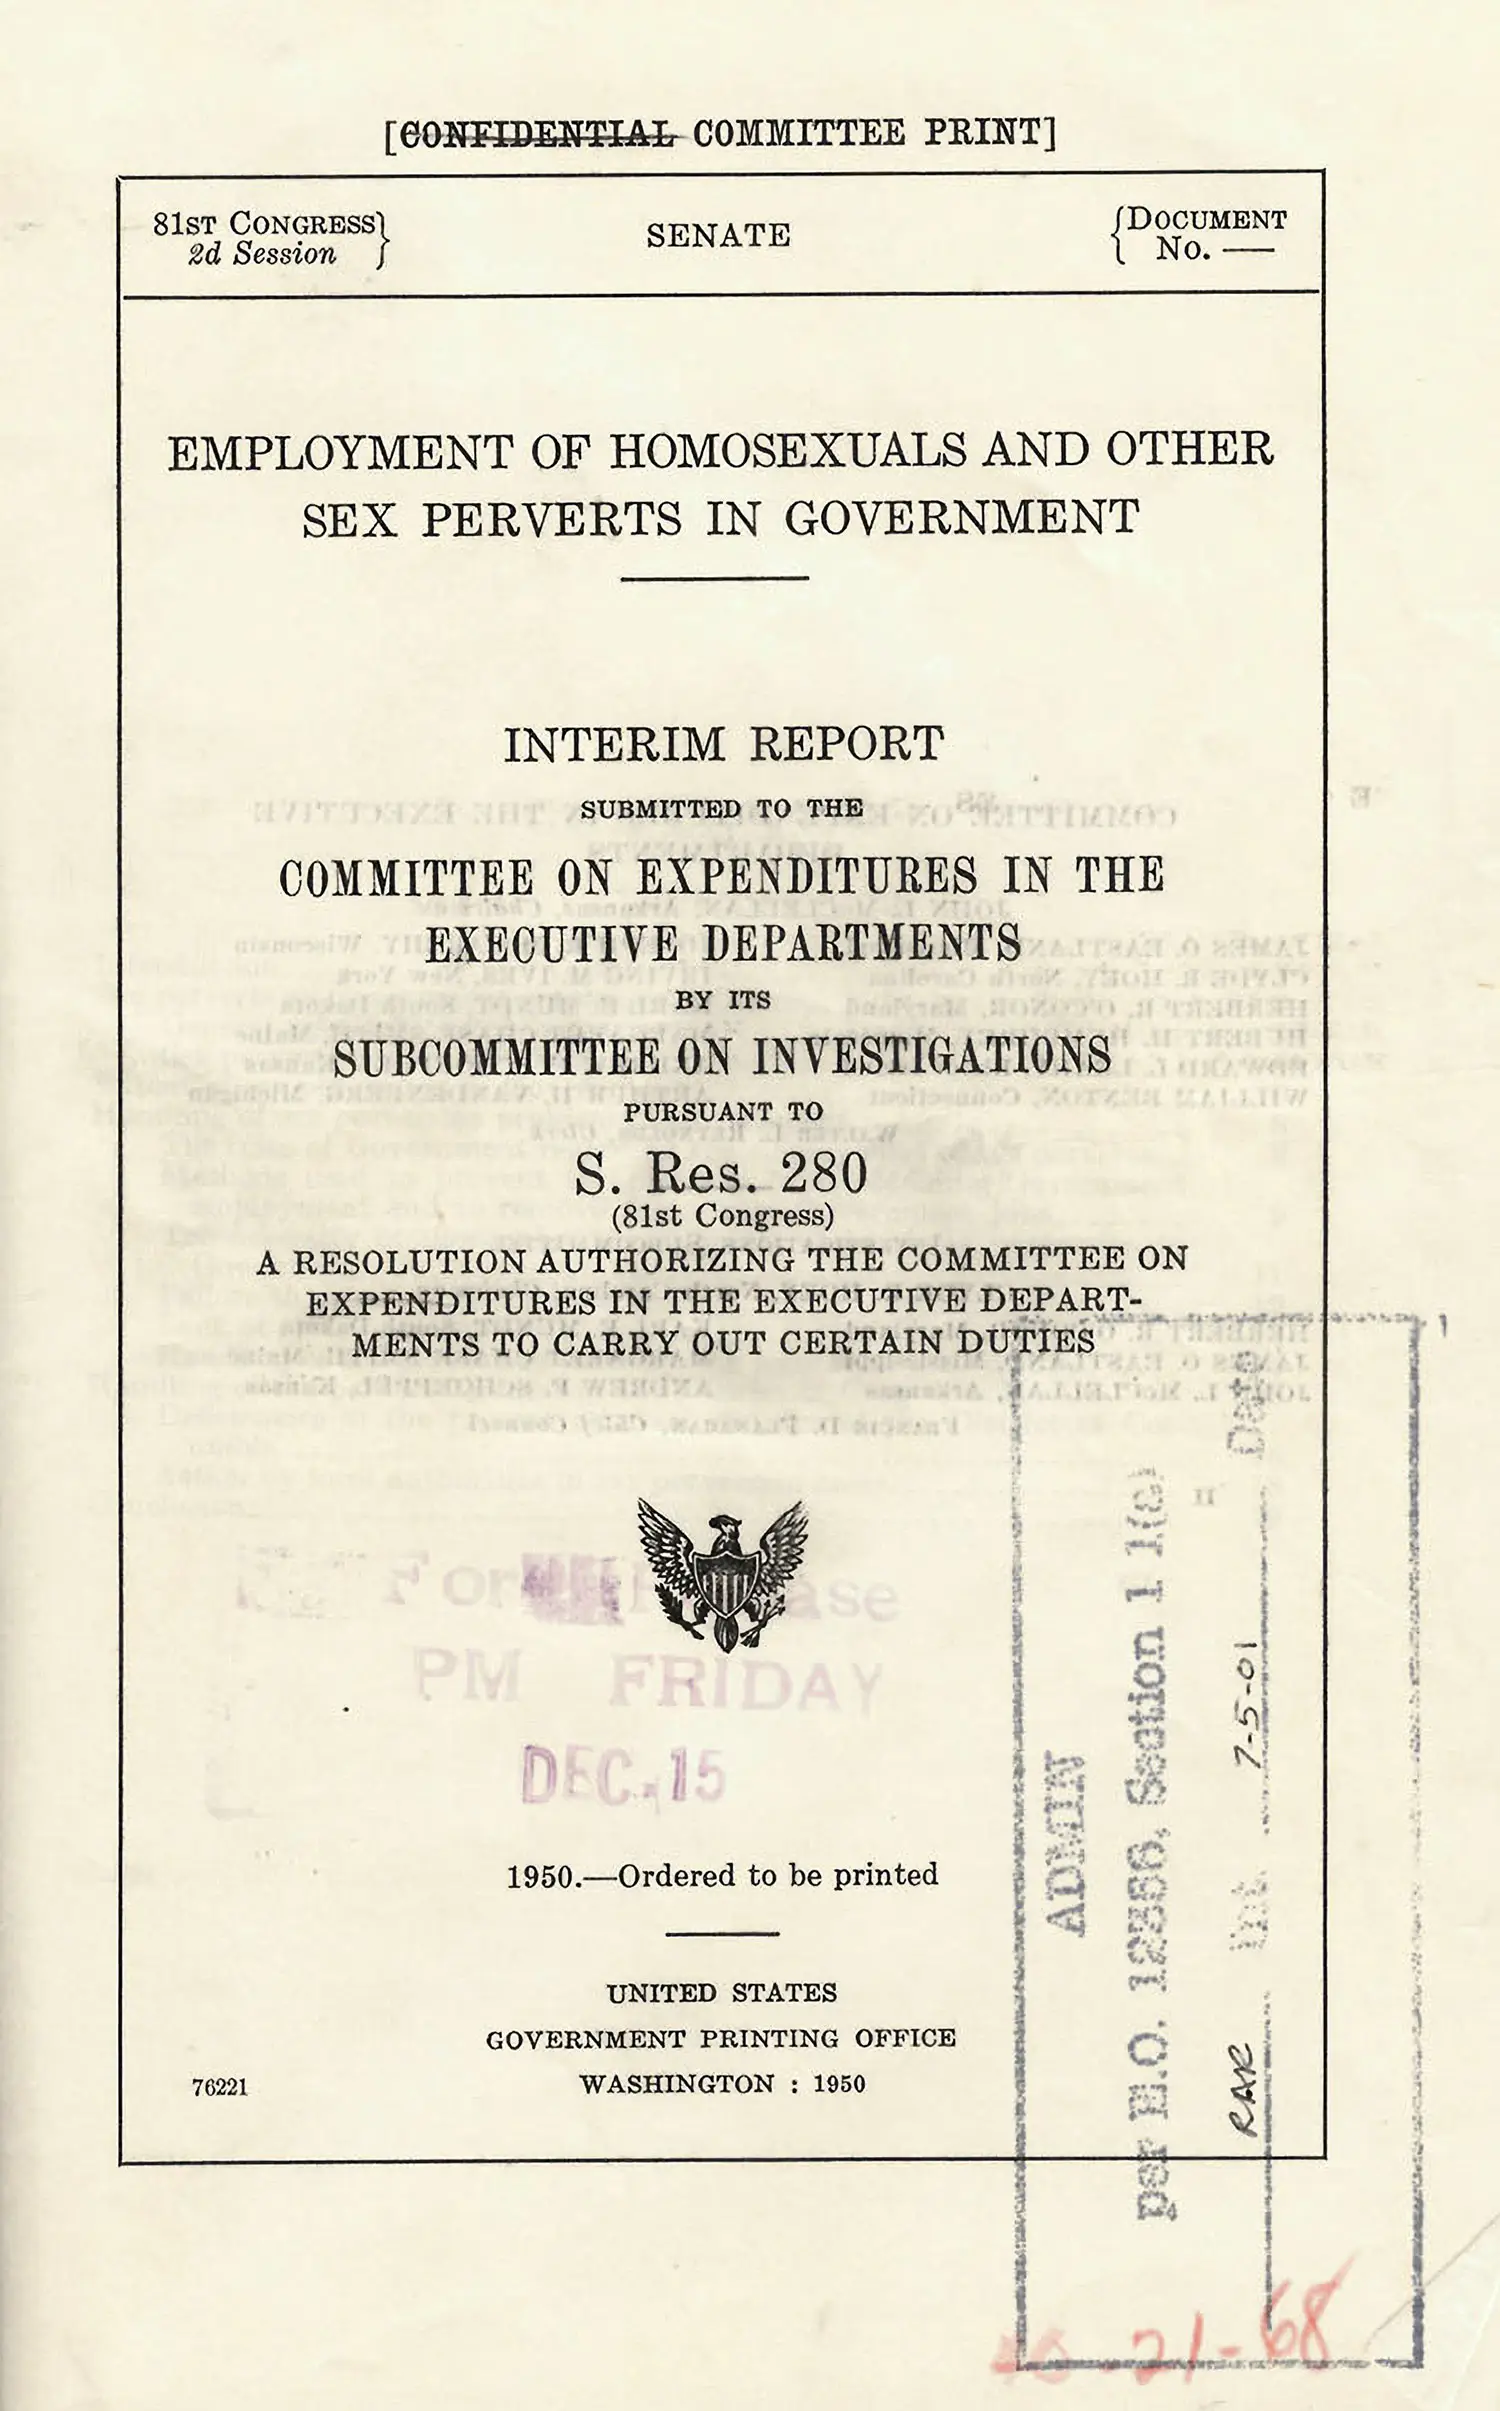 The cover of a senate committee report titled “Employment of Homosexuals and Other Sex Perverts in Government.”